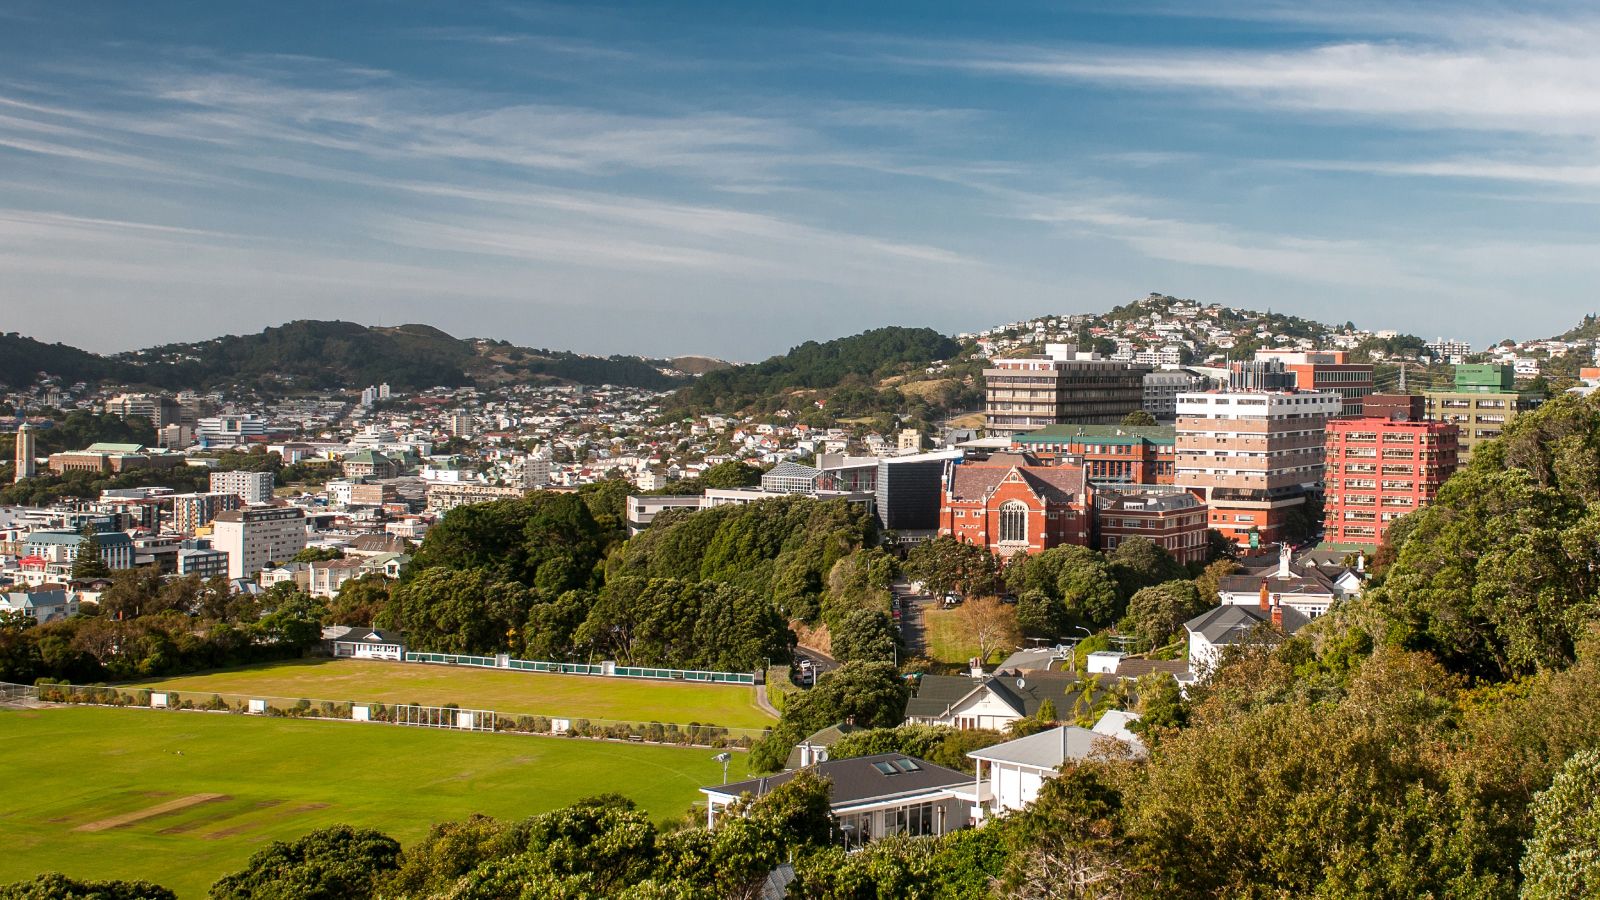 Wide angle of the hunter building with Wellington city in the background, and a grass field in the foreground.